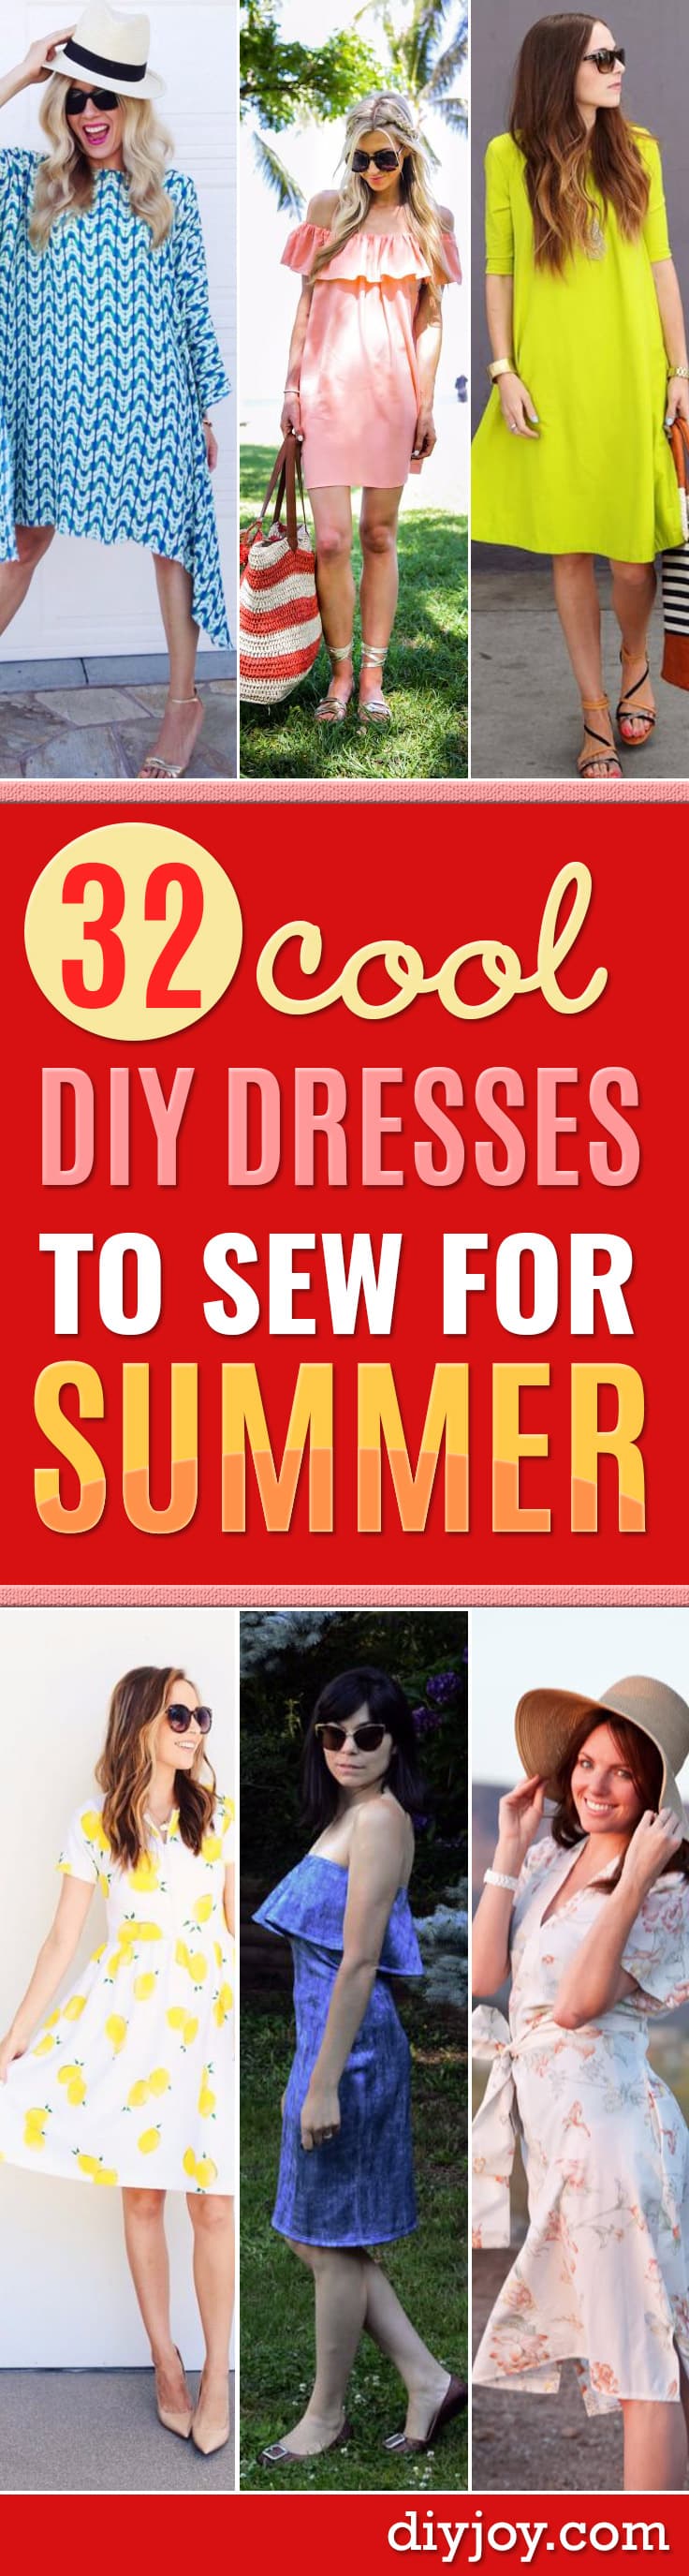 DIY Dresses to Sew for Summer - Best Free Patterns For Dress Ideas - Easy and Cheap Clothes to Make for Women and Teens - Step by Step Sewing Projects - Short, Summer, Winter, Fall, Inexpensive DIY Fashion